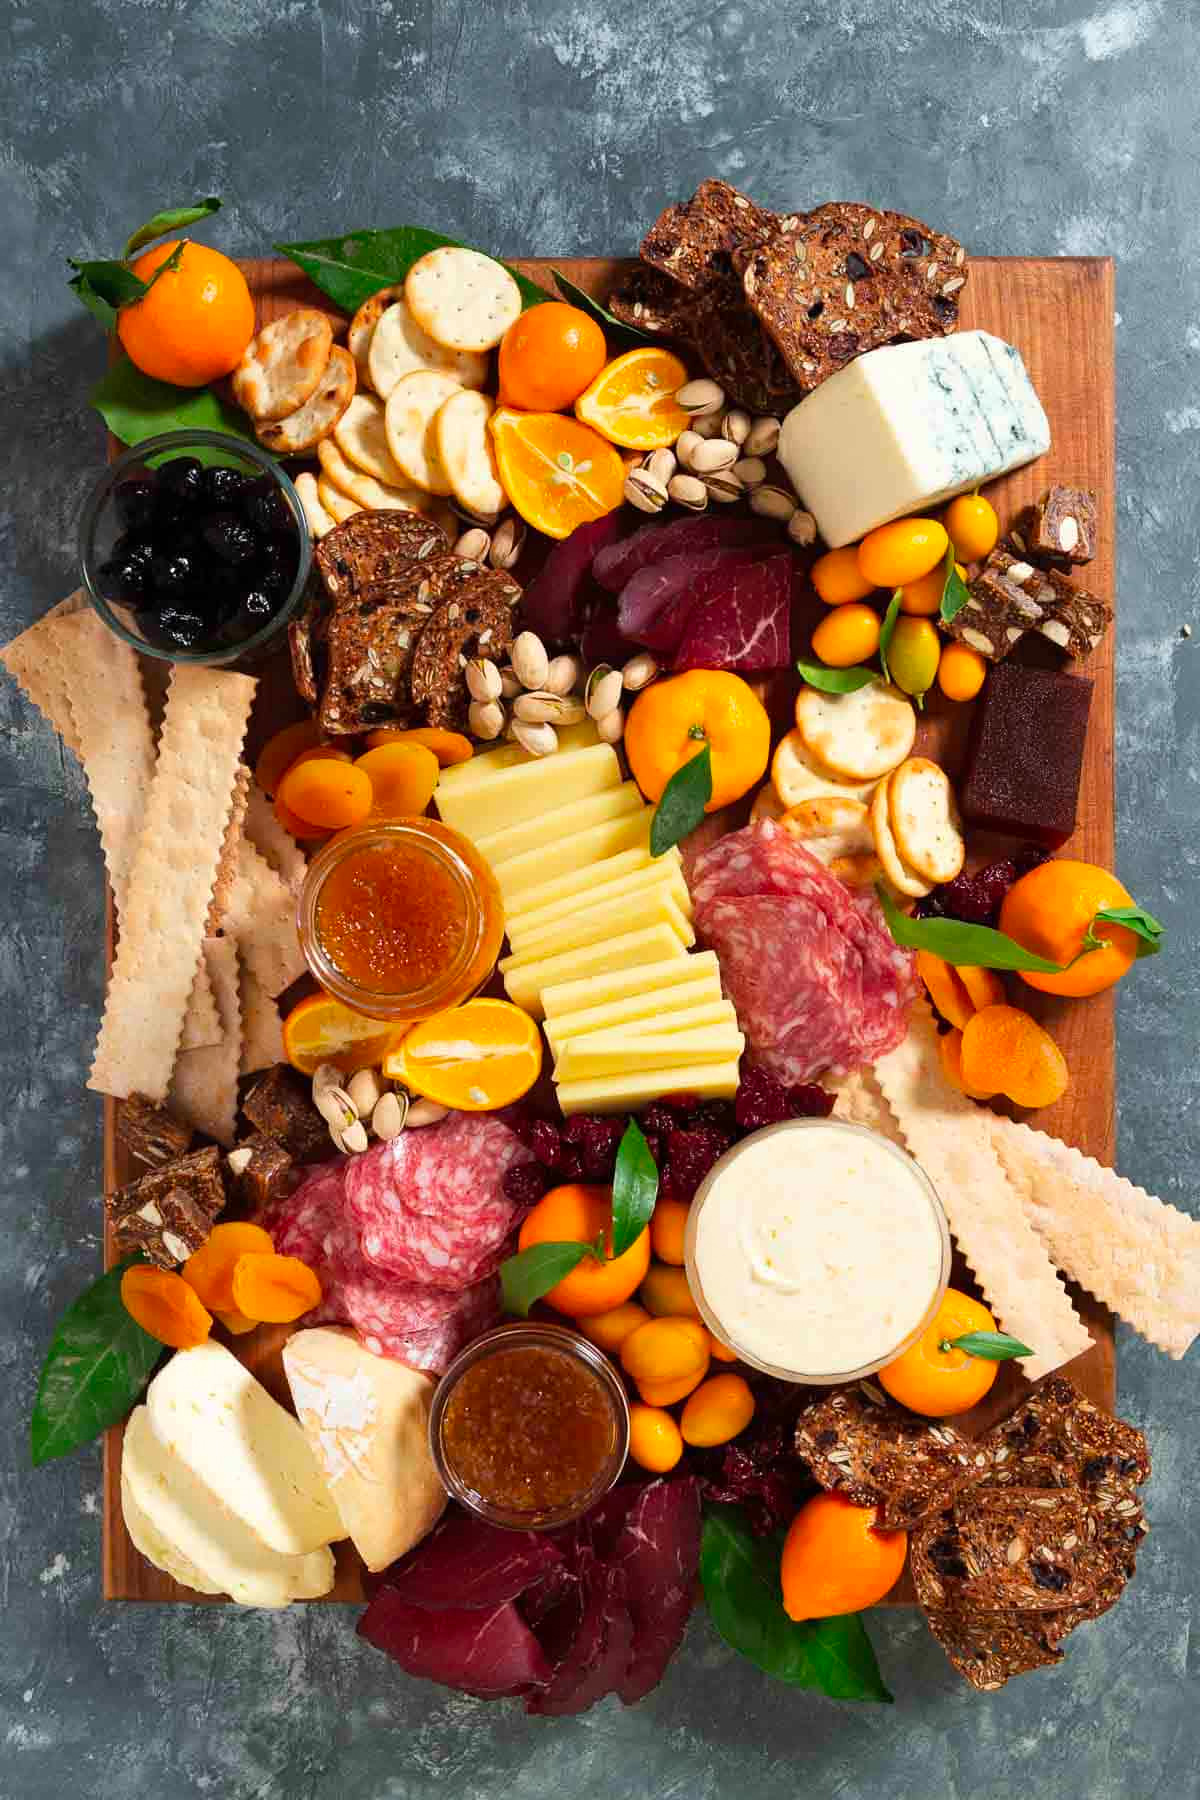 Cup of Zest winter cheese and meat board is complete with meat, cheese, oranges, nuts, crackers, and jelly.